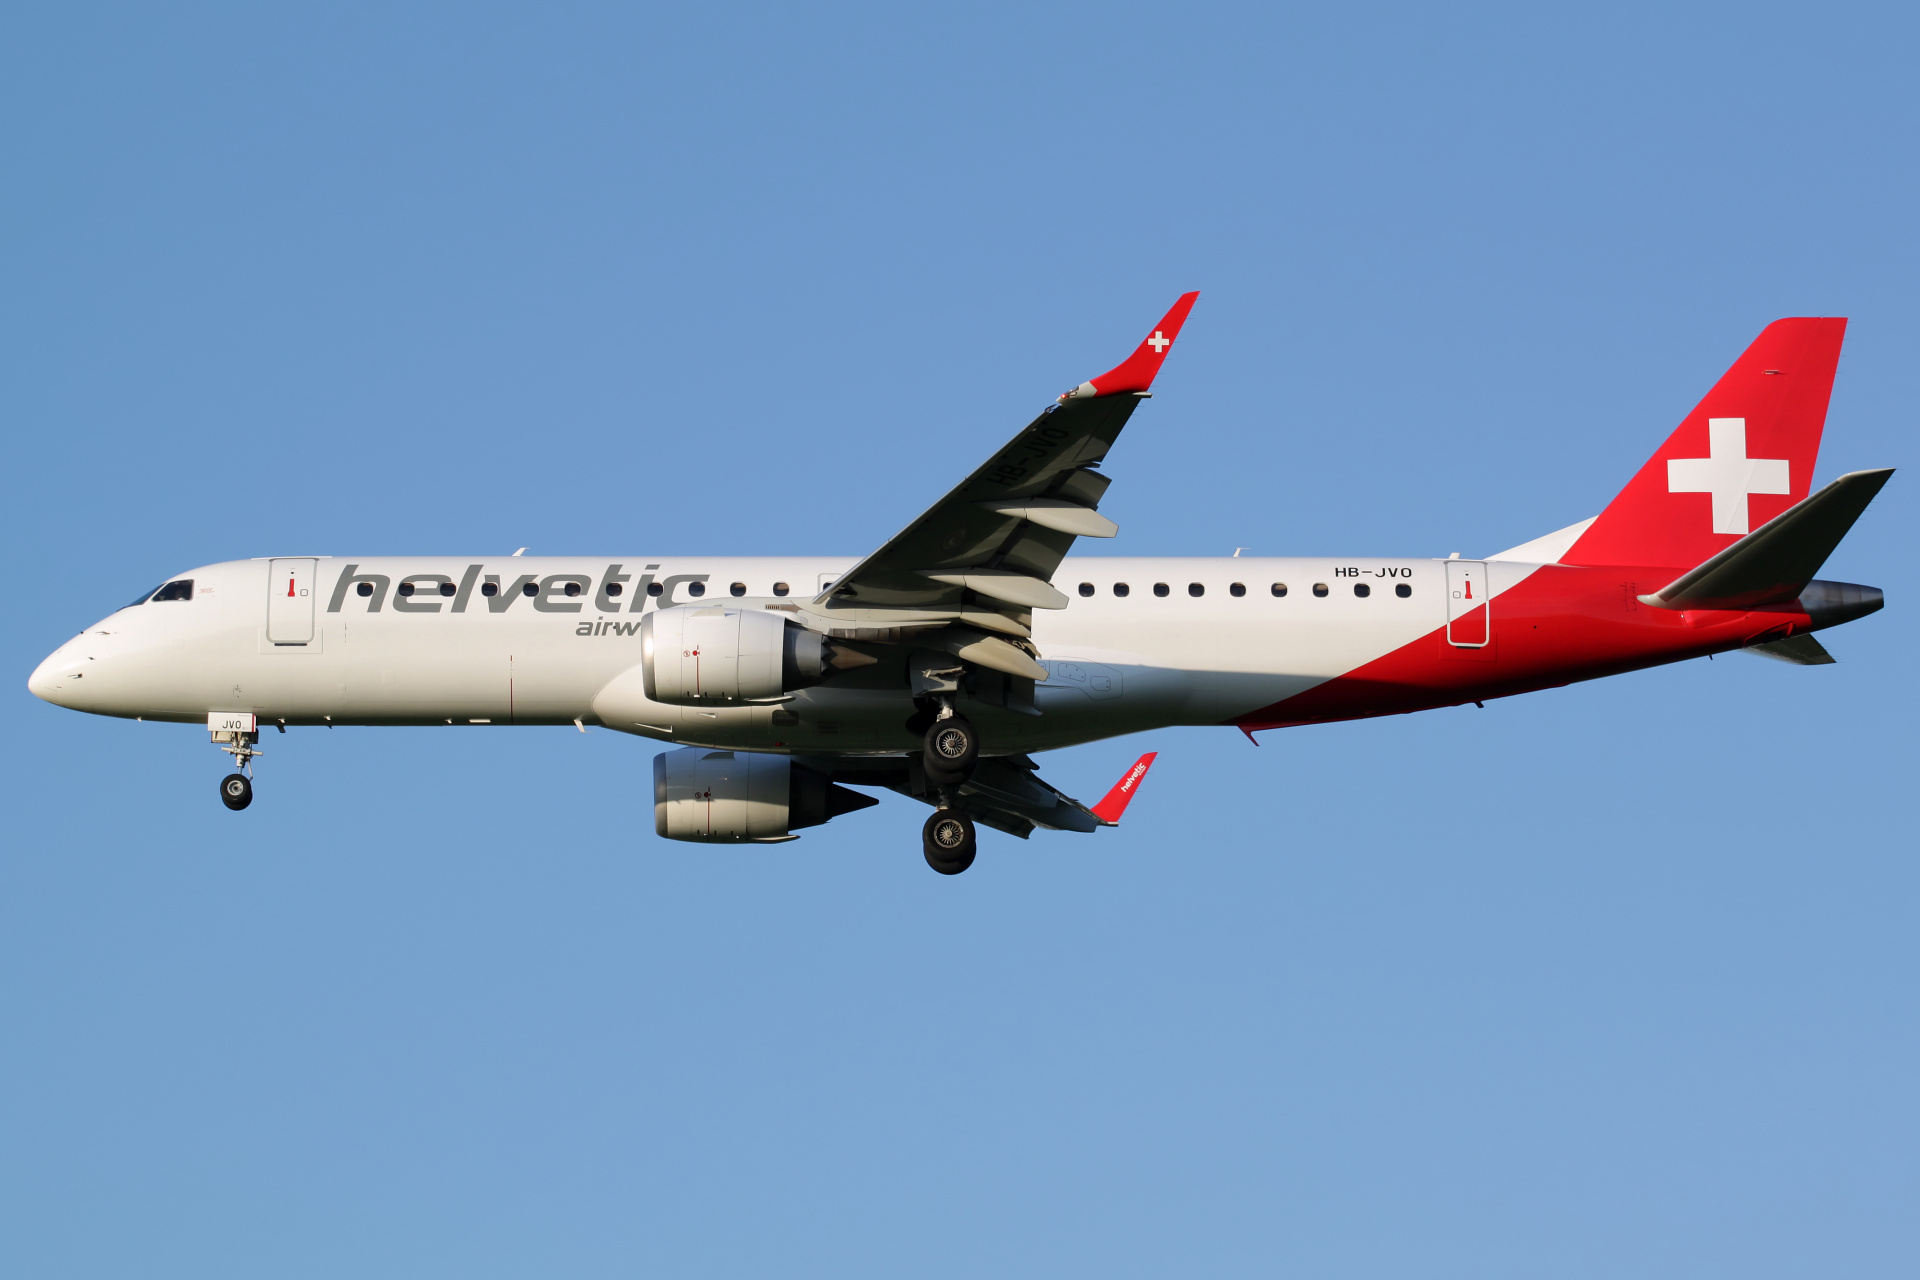 HB-JVO (Aircraft » EPWA Spotting » Embraer E190 » Helvetic Airways)